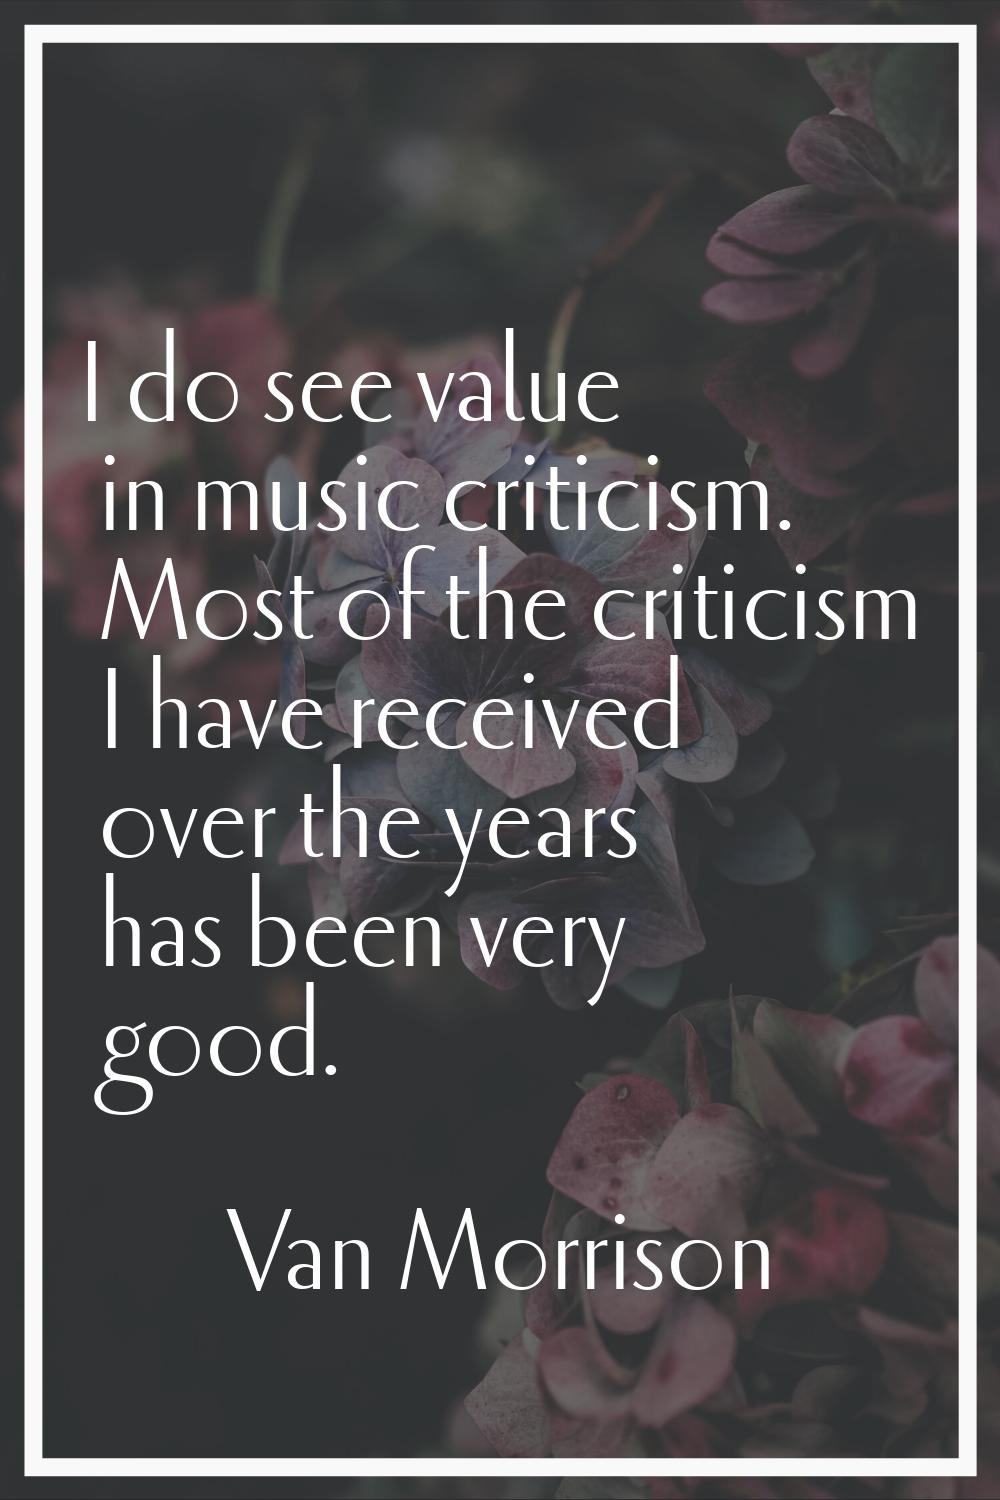 I do see value in music criticism. Most of the criticism I have received over the years has been ve